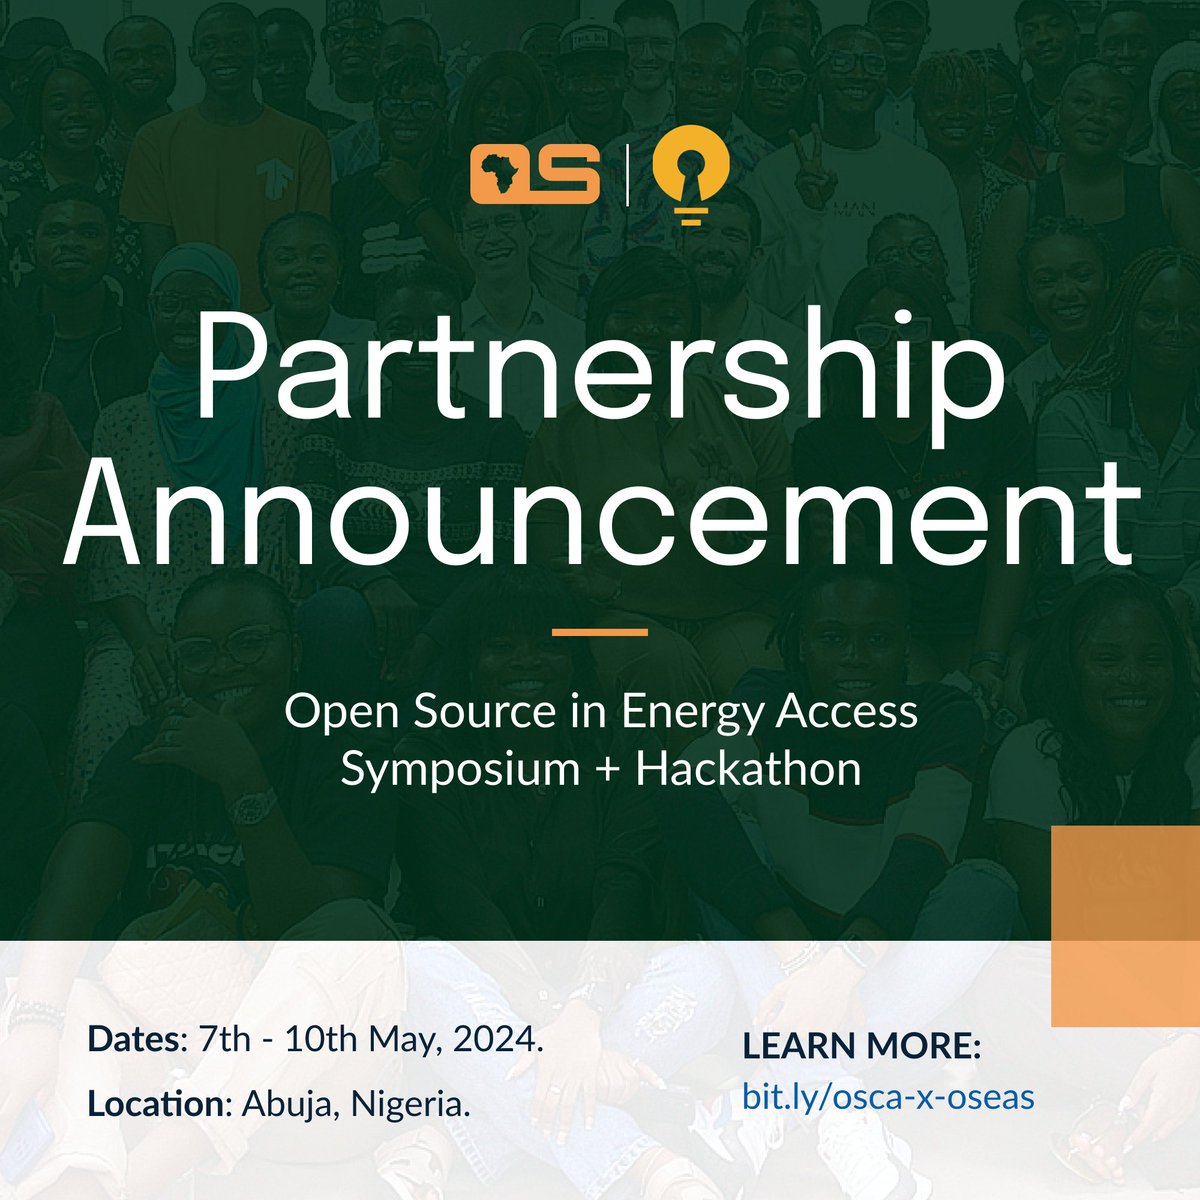 Hey developers! 👋🏾🫡 We’re excited to announce our partnership with @EnAccessFdn for the Open Source in Energy Access Symposium and Hackathon taking place between the 7th - 10th May 2024. More juicy details below 👇🏾 #OpenAccessEnergy #OpenSourceEnergy #OSEAS #OSEAS2024